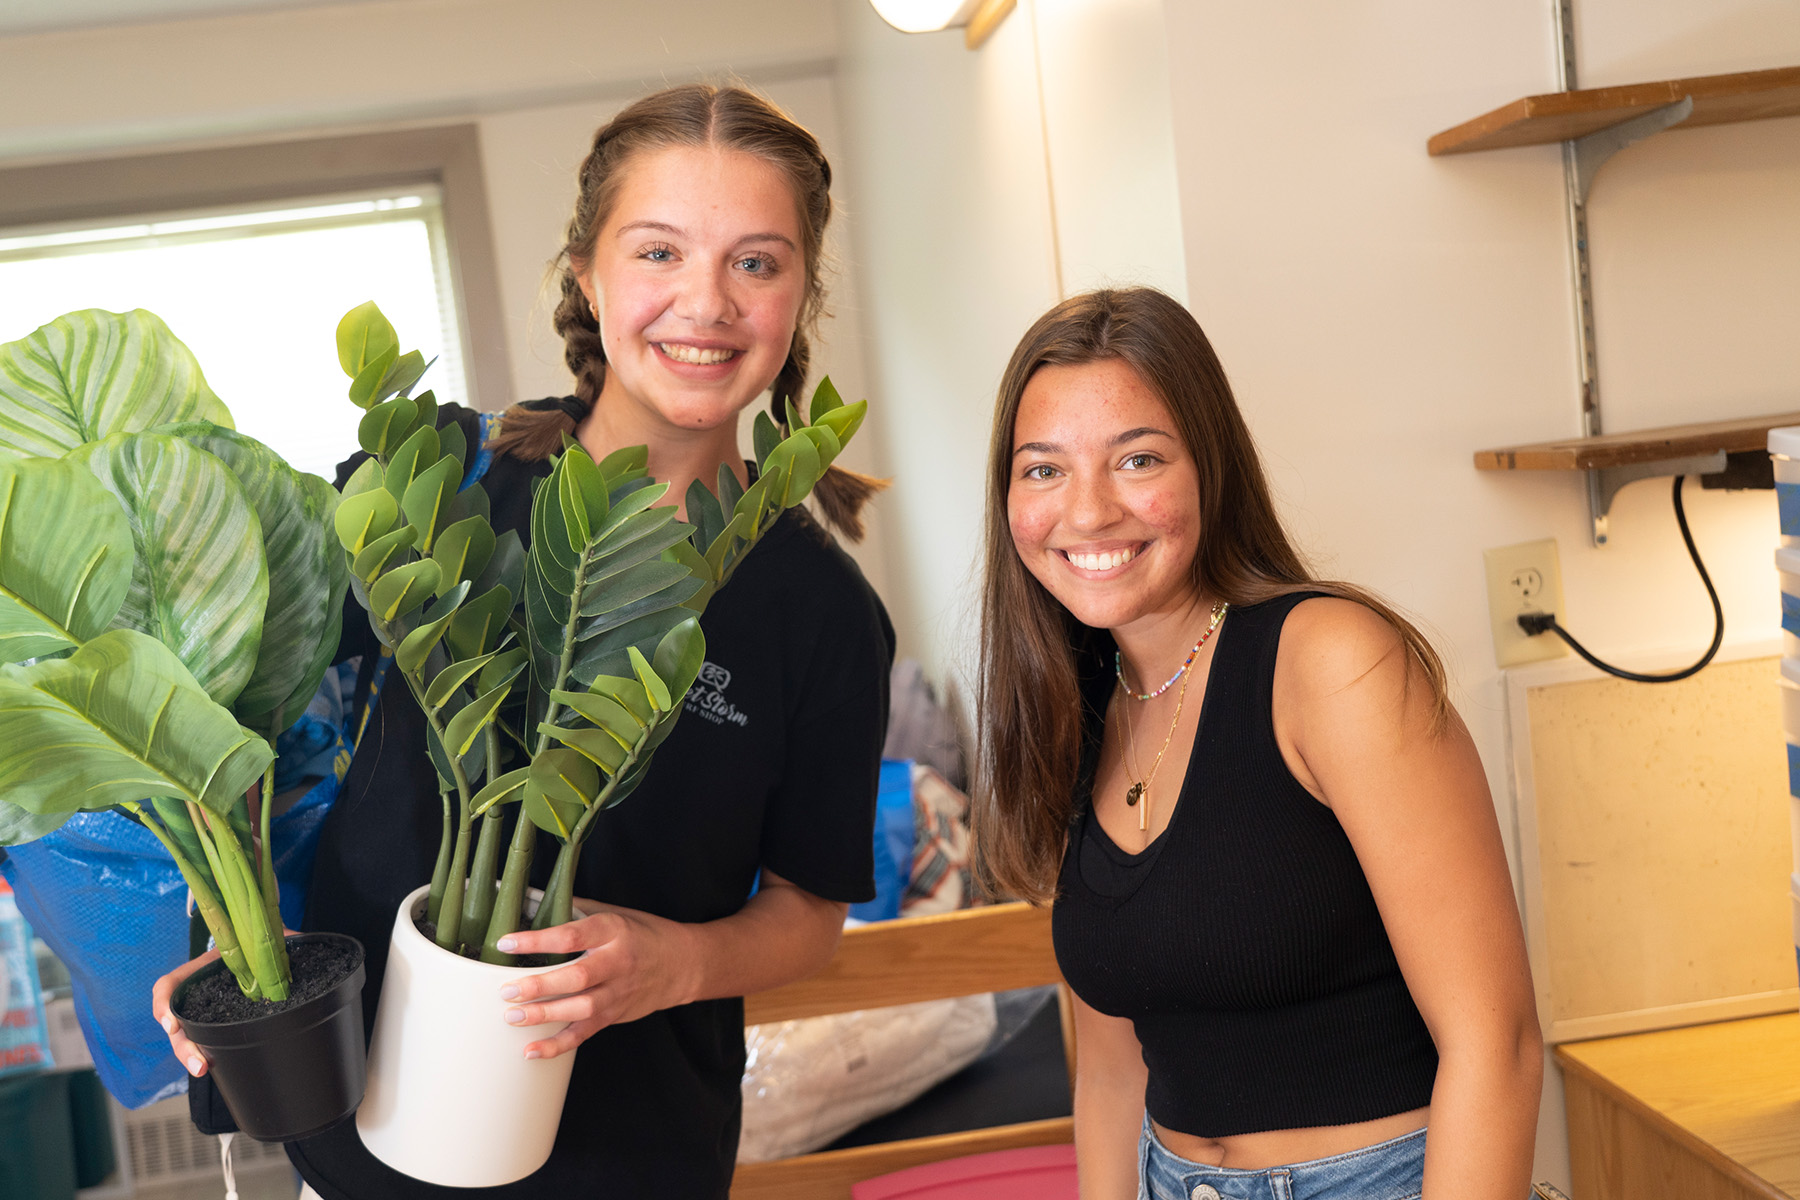 Two students smile while holding a plant.